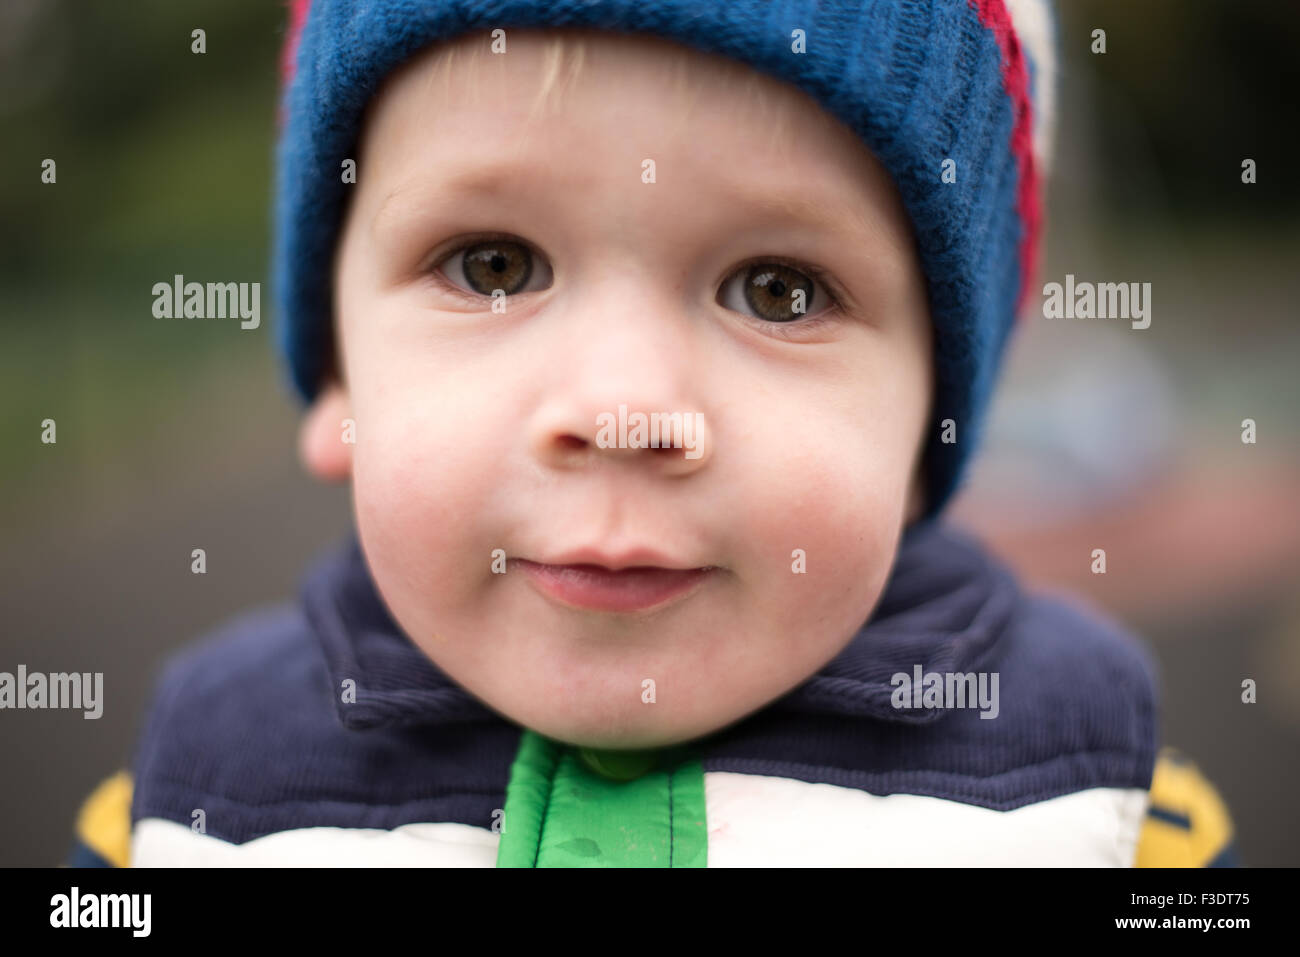 Boy playing in park close up Stock Photo